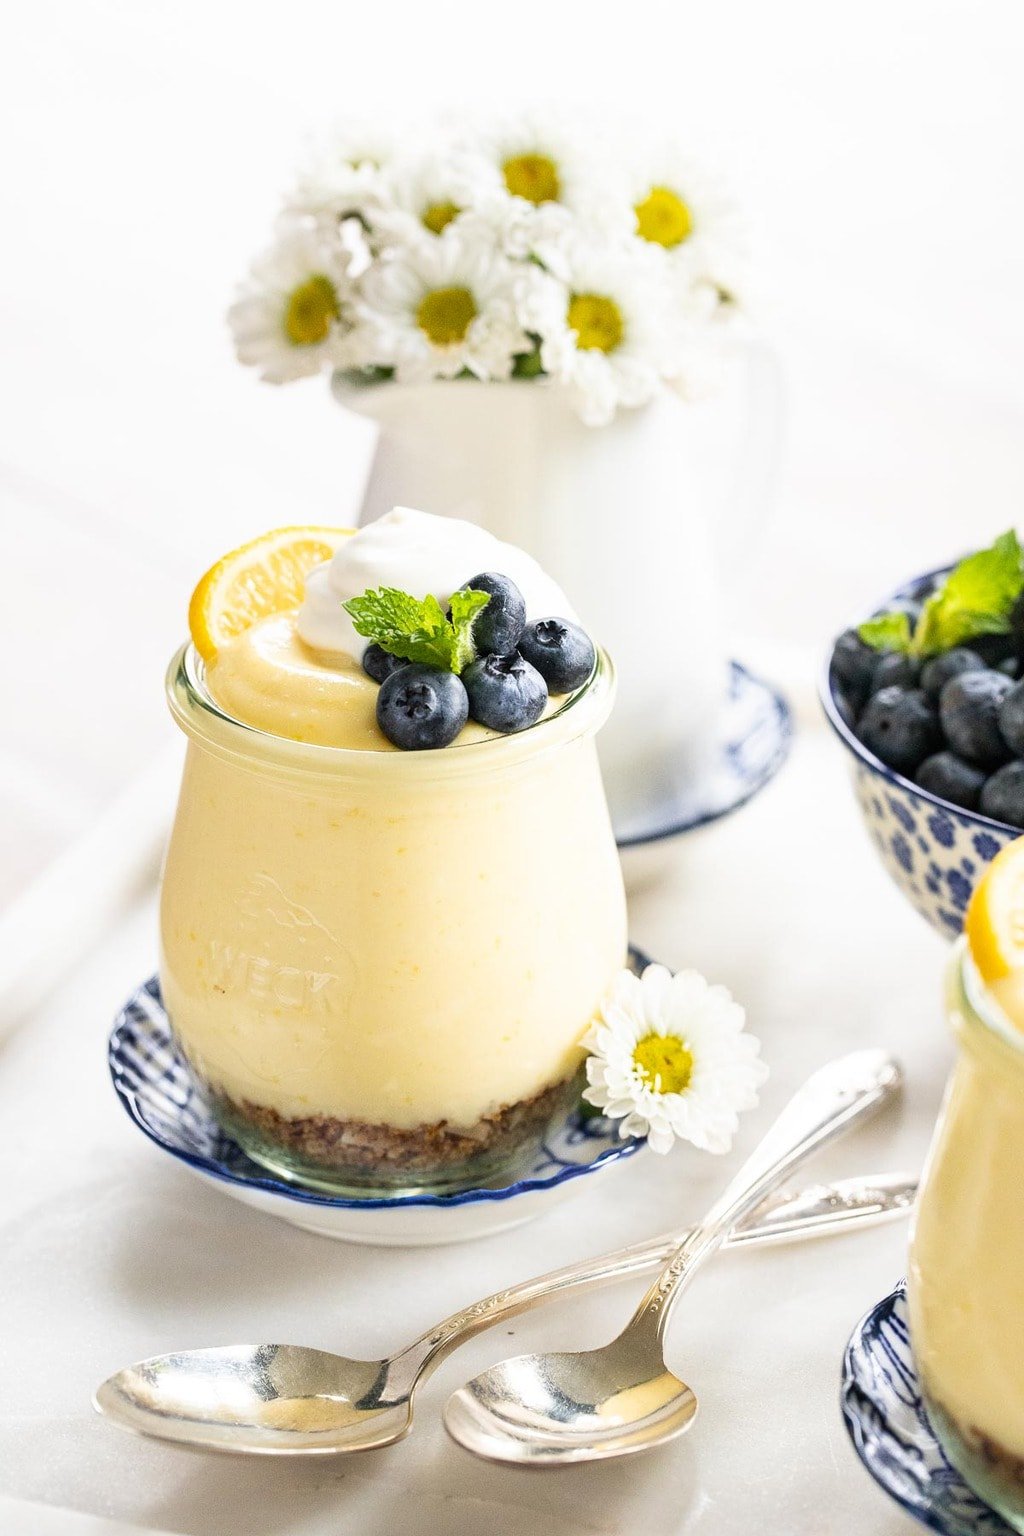 Vertical photo of a glass dessert jar of Easy Lemon Curd Mousse garnished with fresh blueberries and mint leaves.